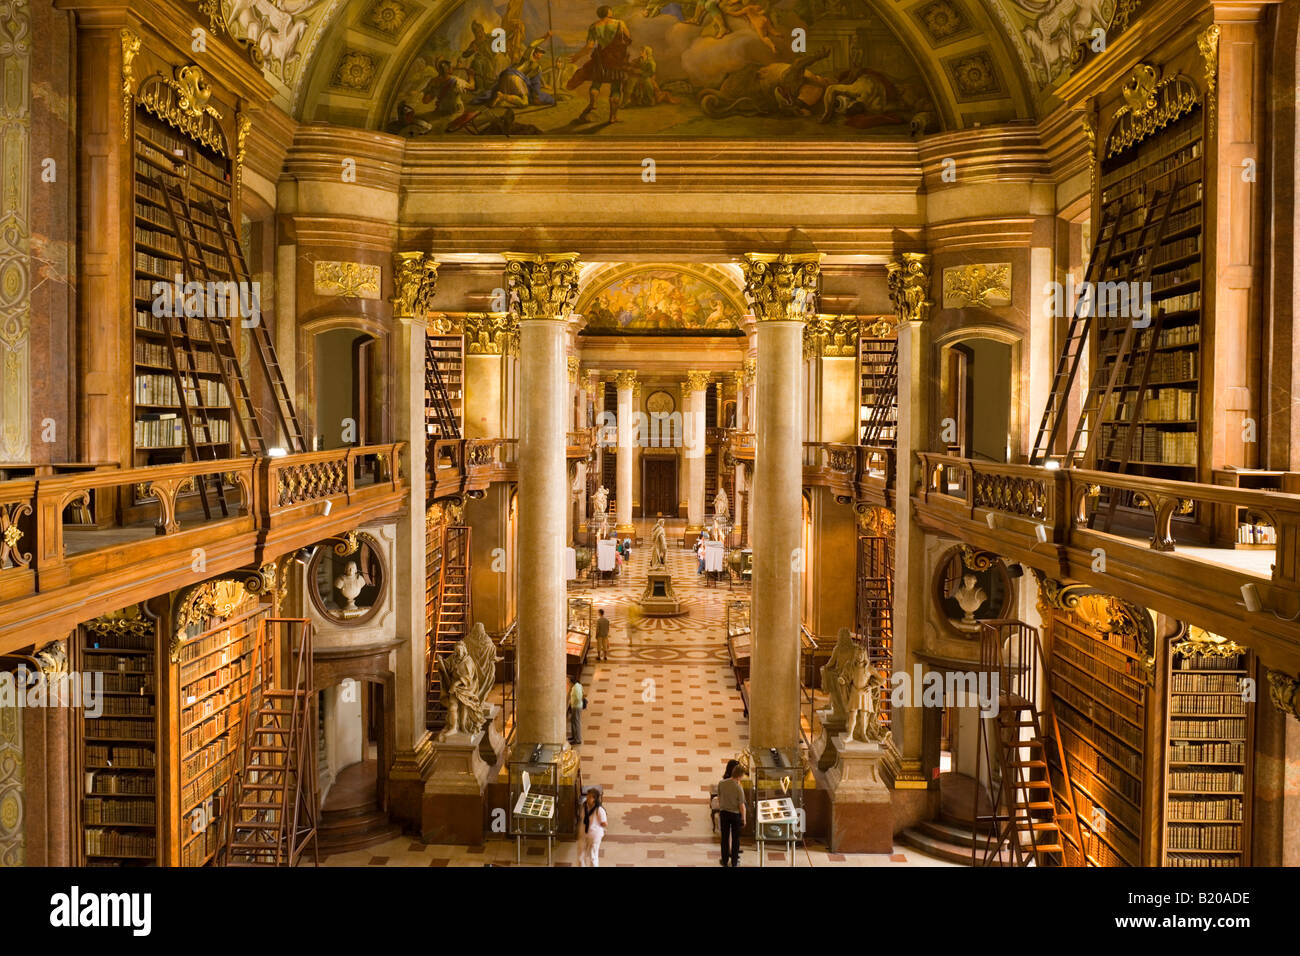 View inside the Prunksaal of the Nationalbibliothek National Libary Vienna Austria Stock Photo